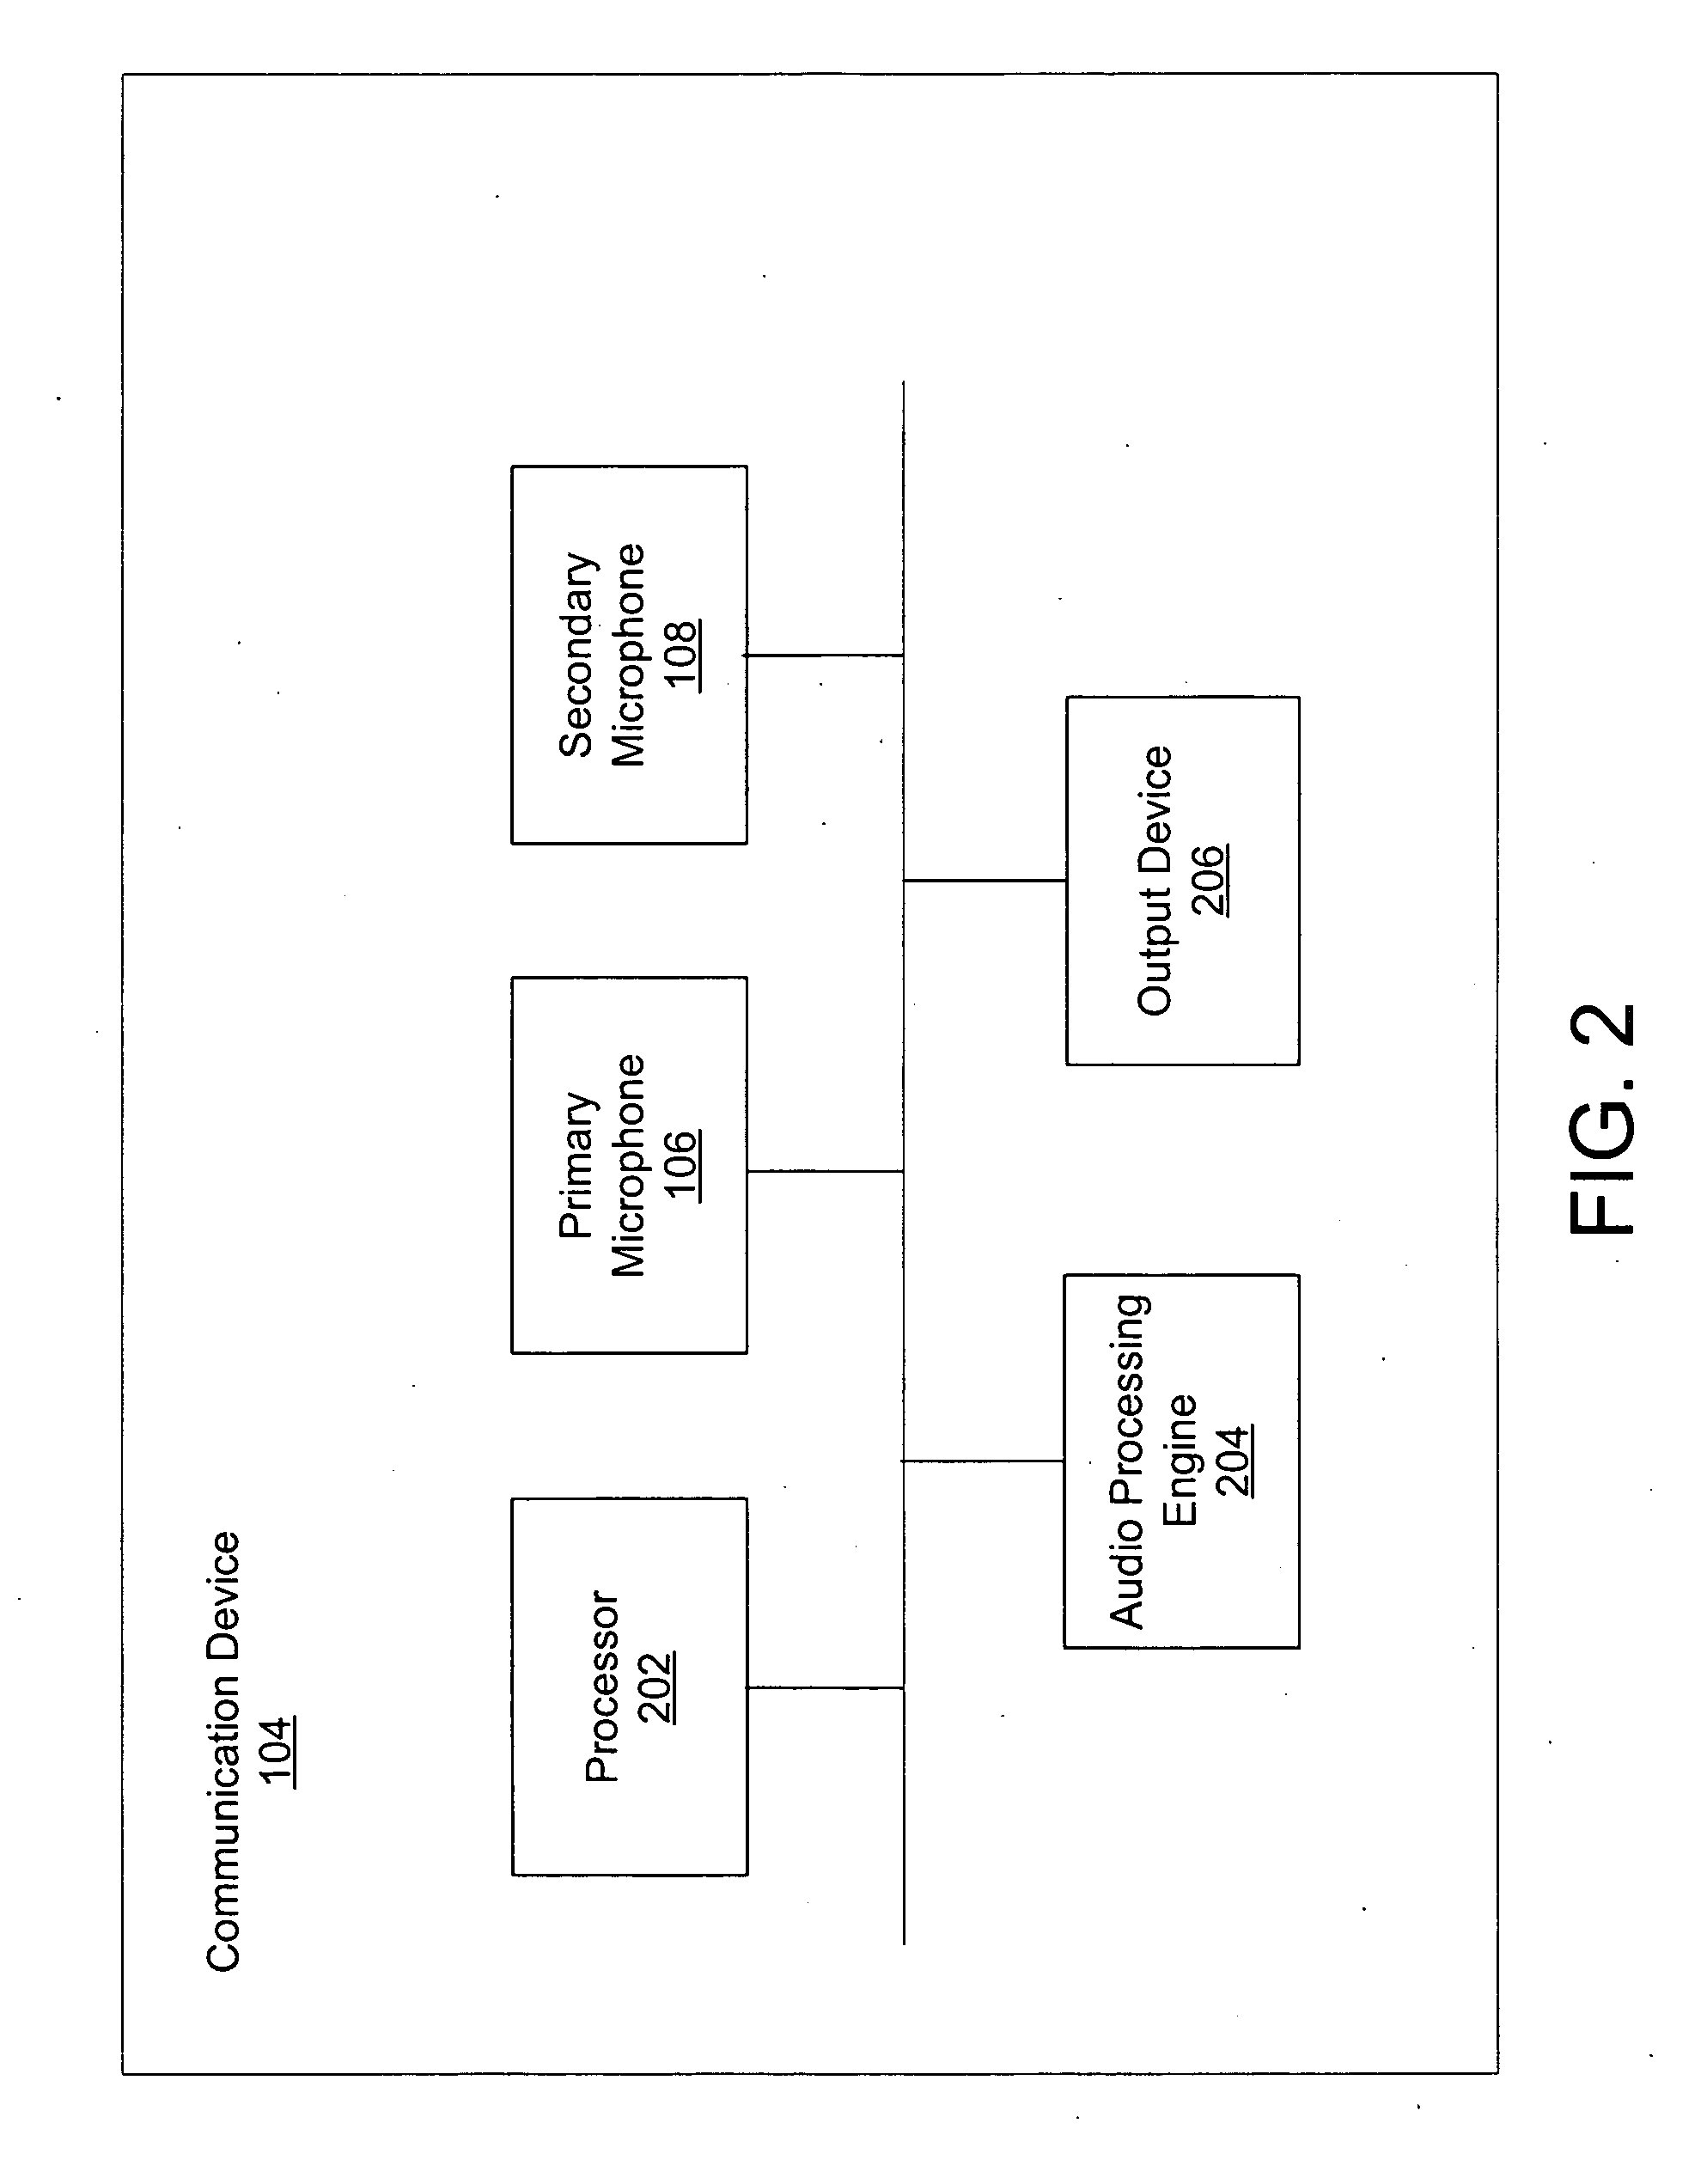 System and method for utilizing inter-microphone level differences for speech enhancement